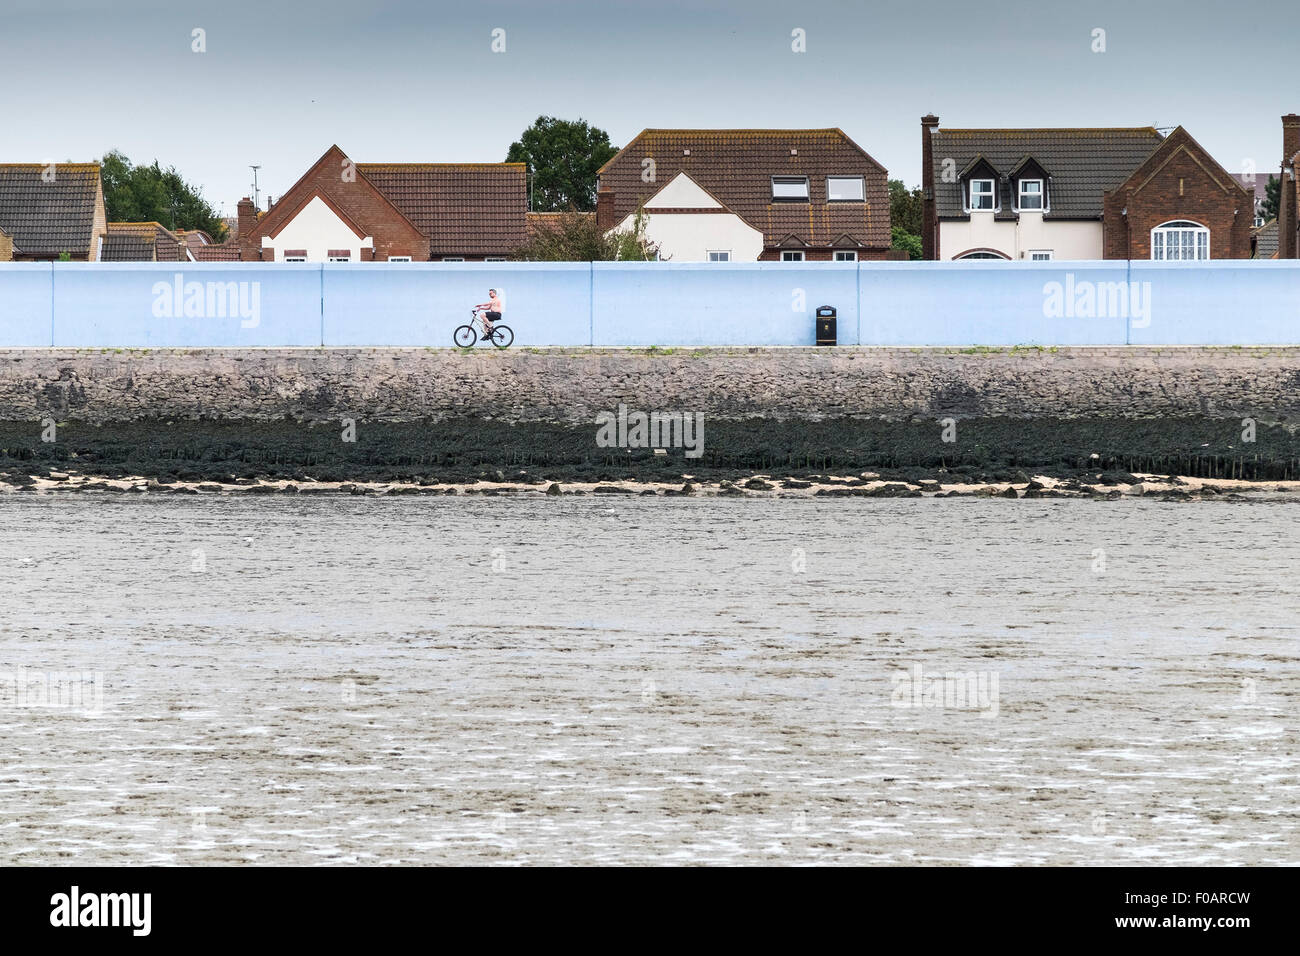 Canvey Island - the sea wall protecting properties on Canvey Island, Essex. Stock Photo